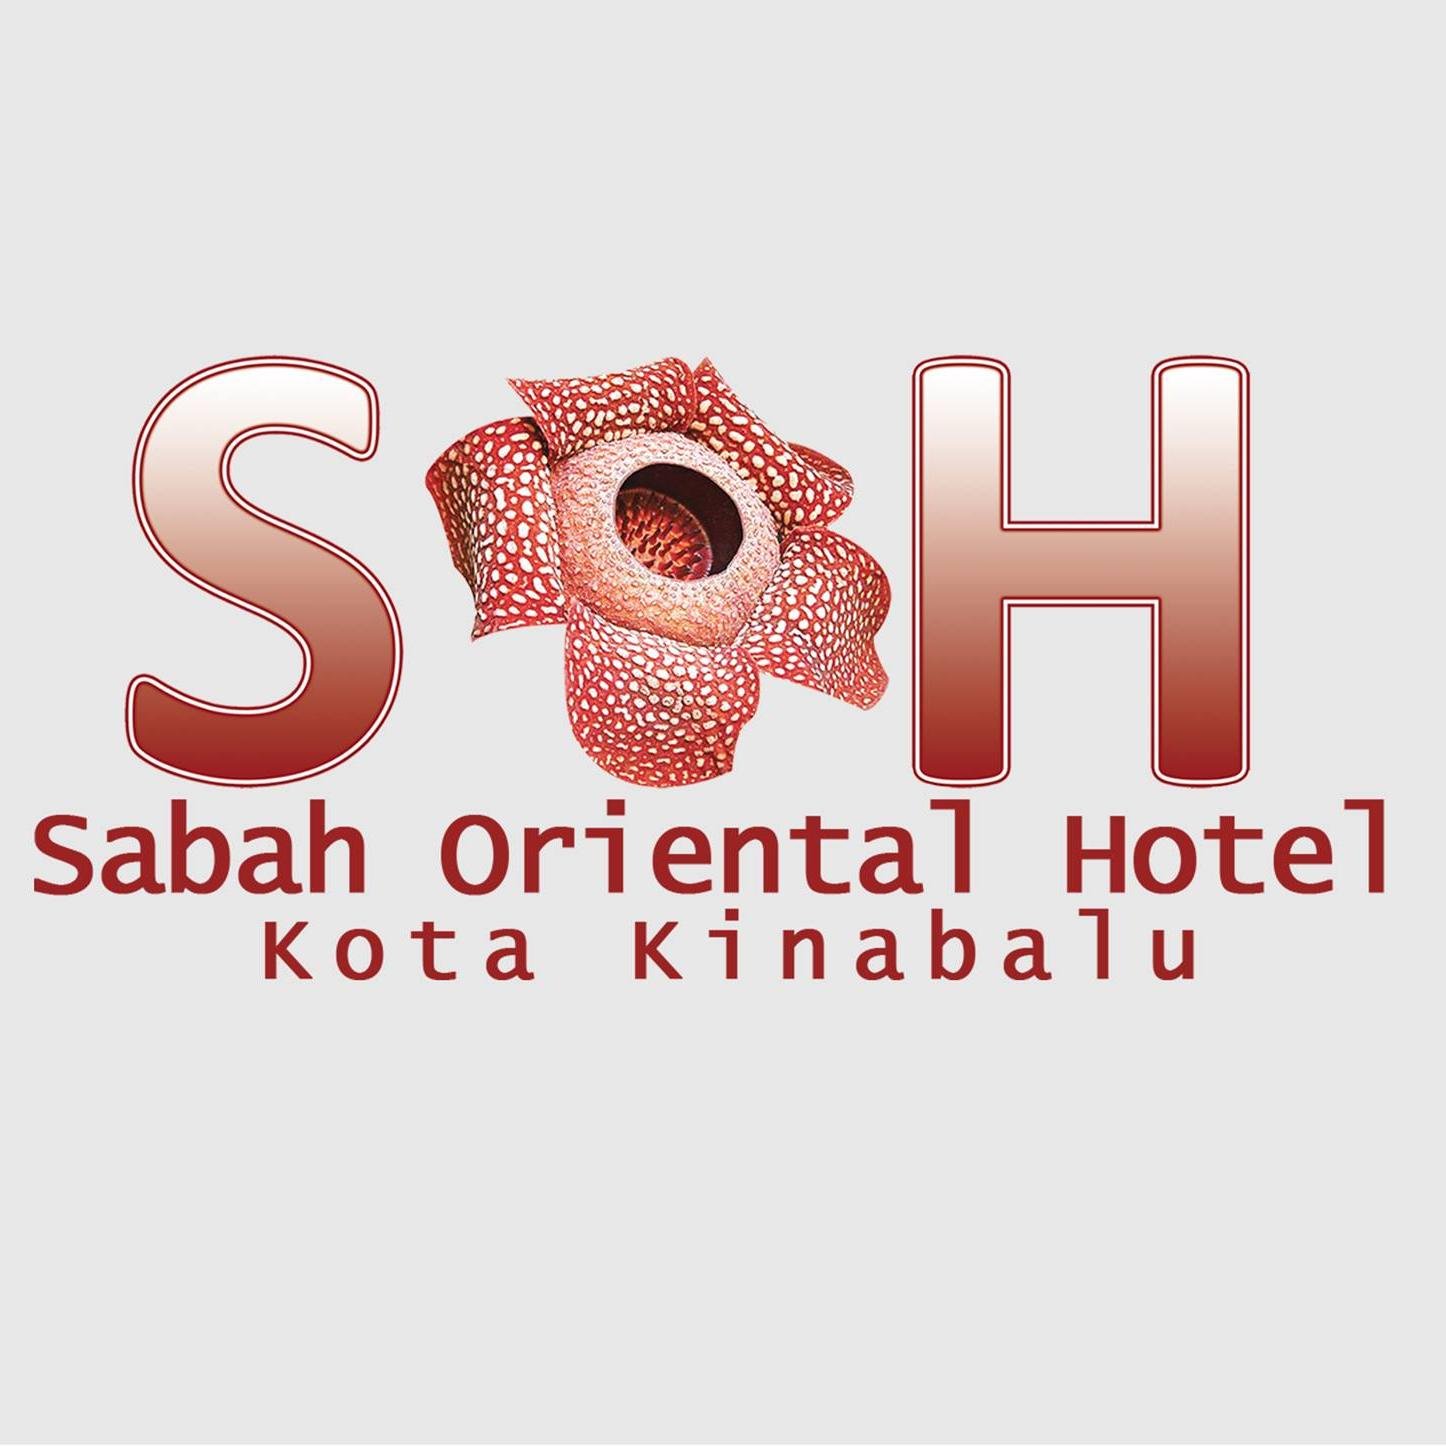 Contact us at +6088-258 998 or email us at reservation@sabahoriental.com.my